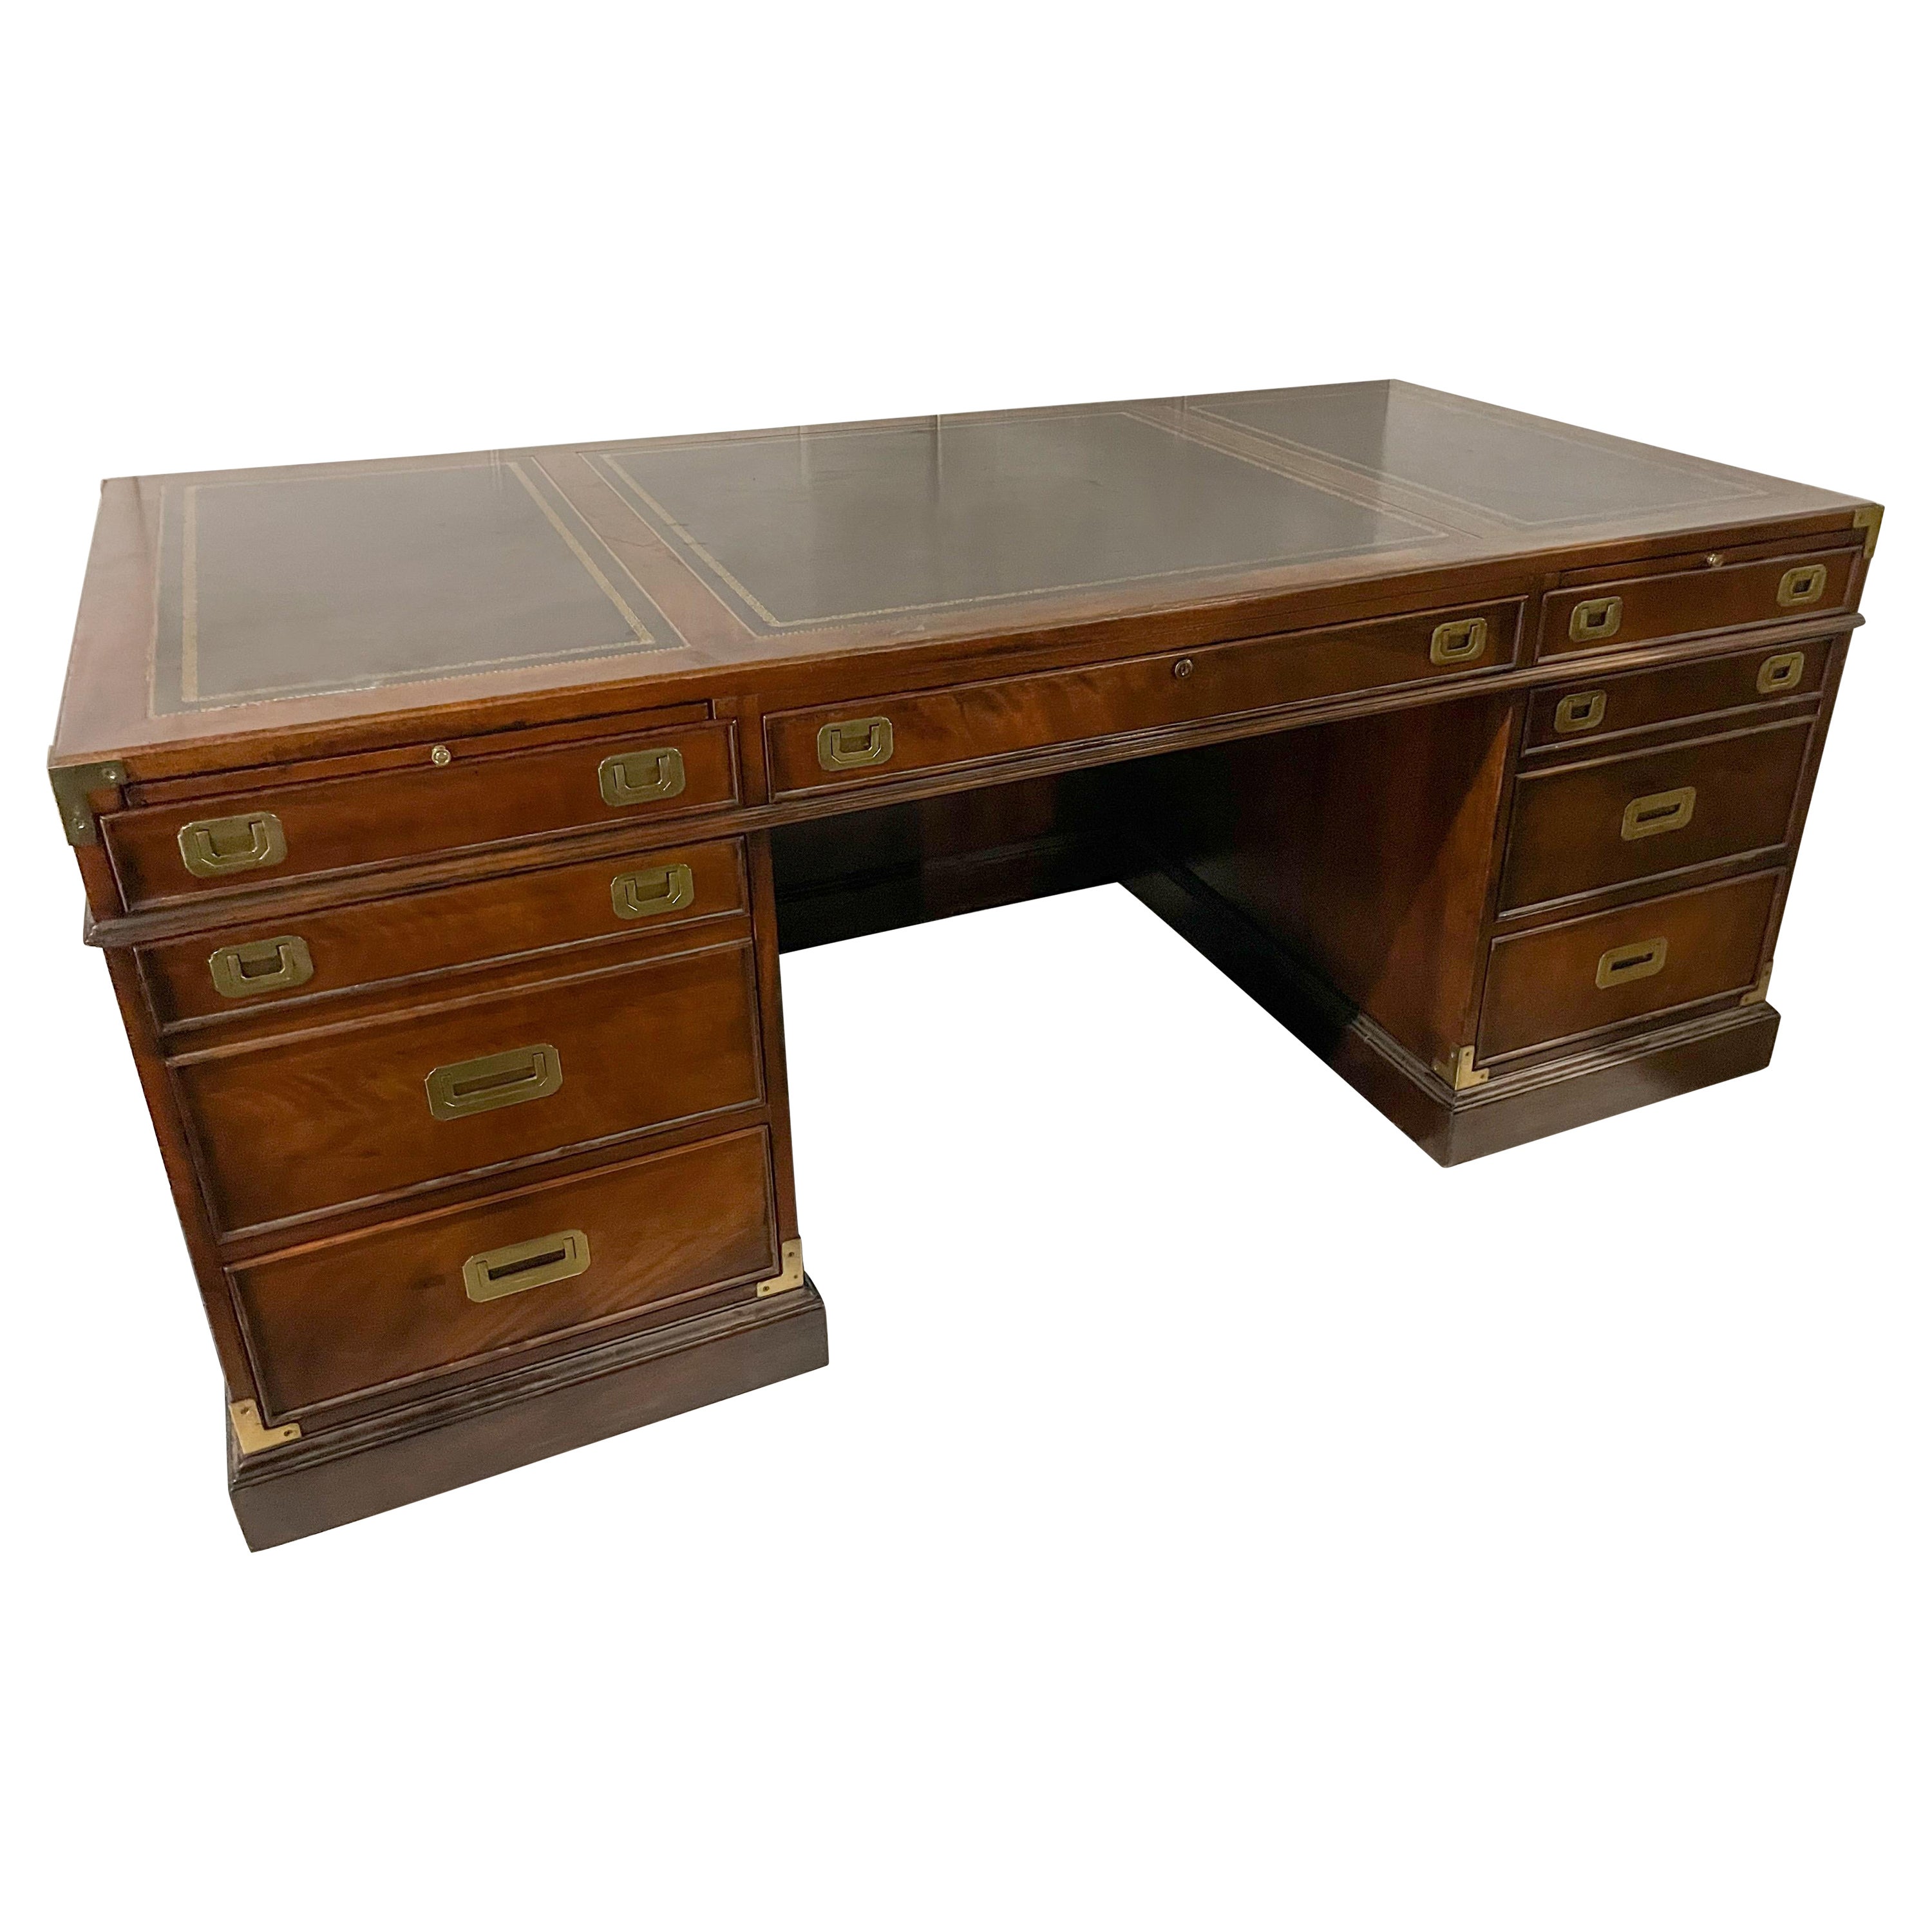 1970s English Mahogany Campaign Style Leather Top Executive Desk by Sligh